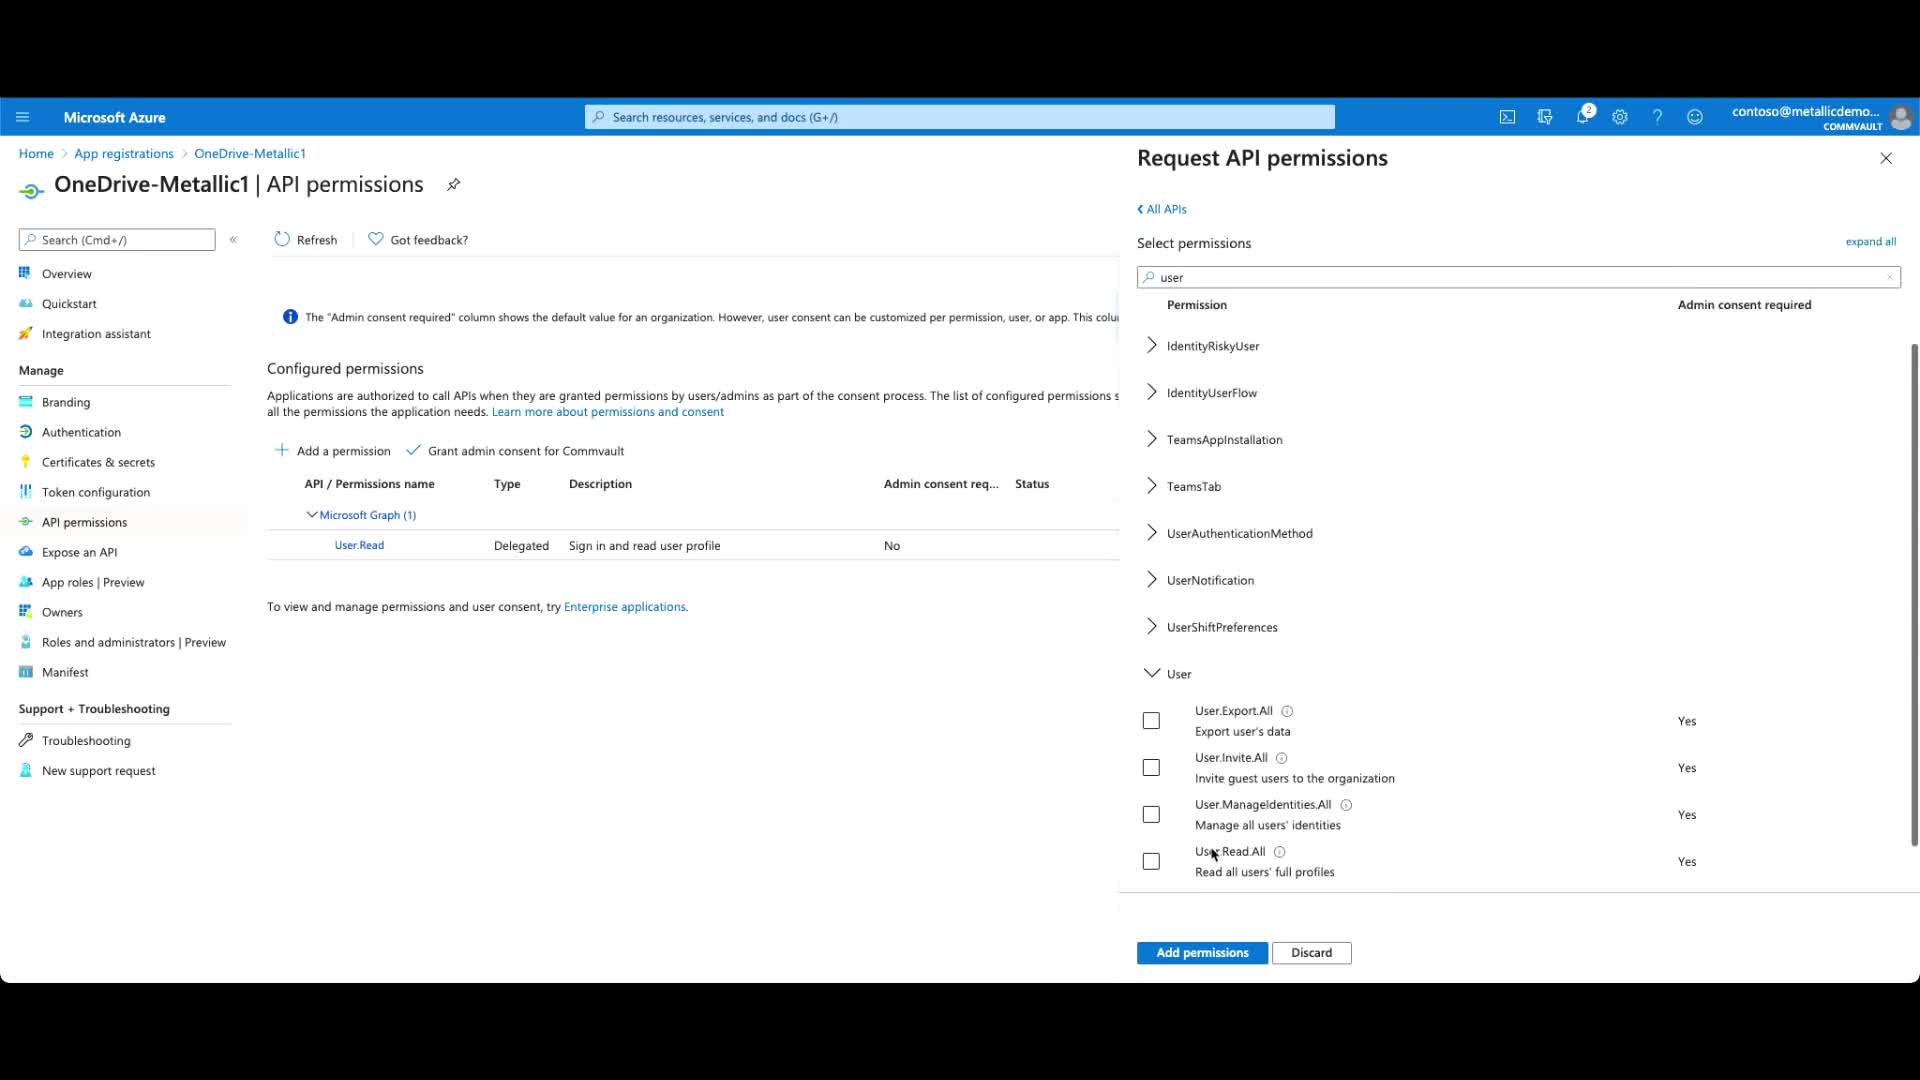 4.3.Setting up OneDrive backups with the Custom Configuration